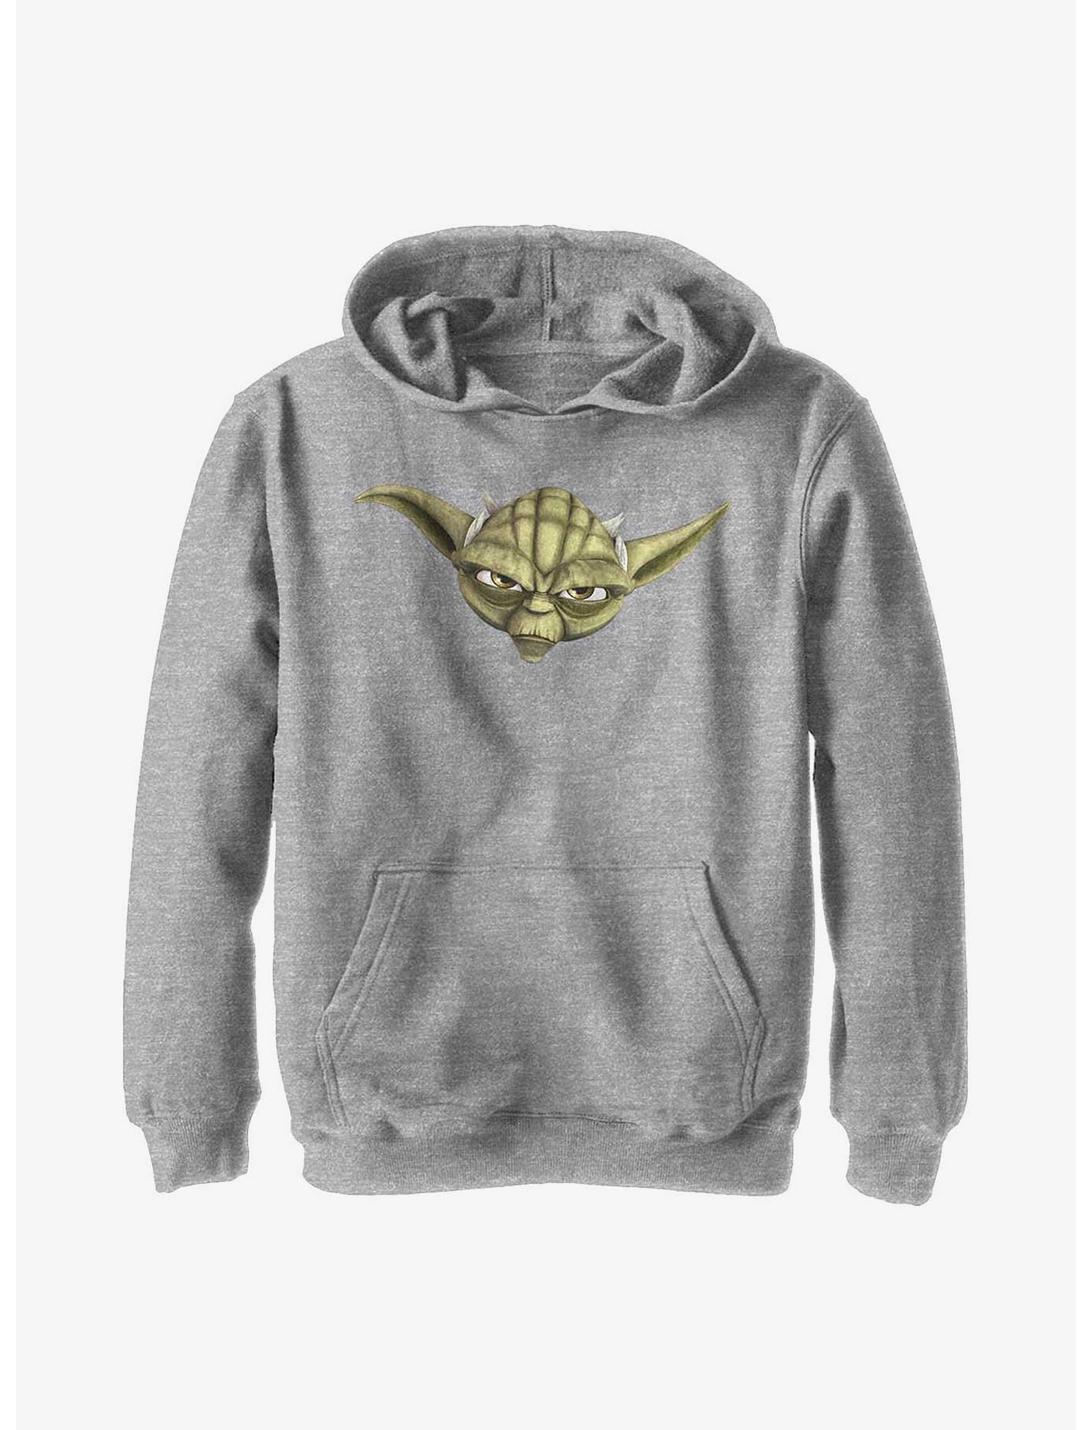 Star Wars: The Clone Wars Yoda Face Youth Hoodie, ATH HTR, hi-res